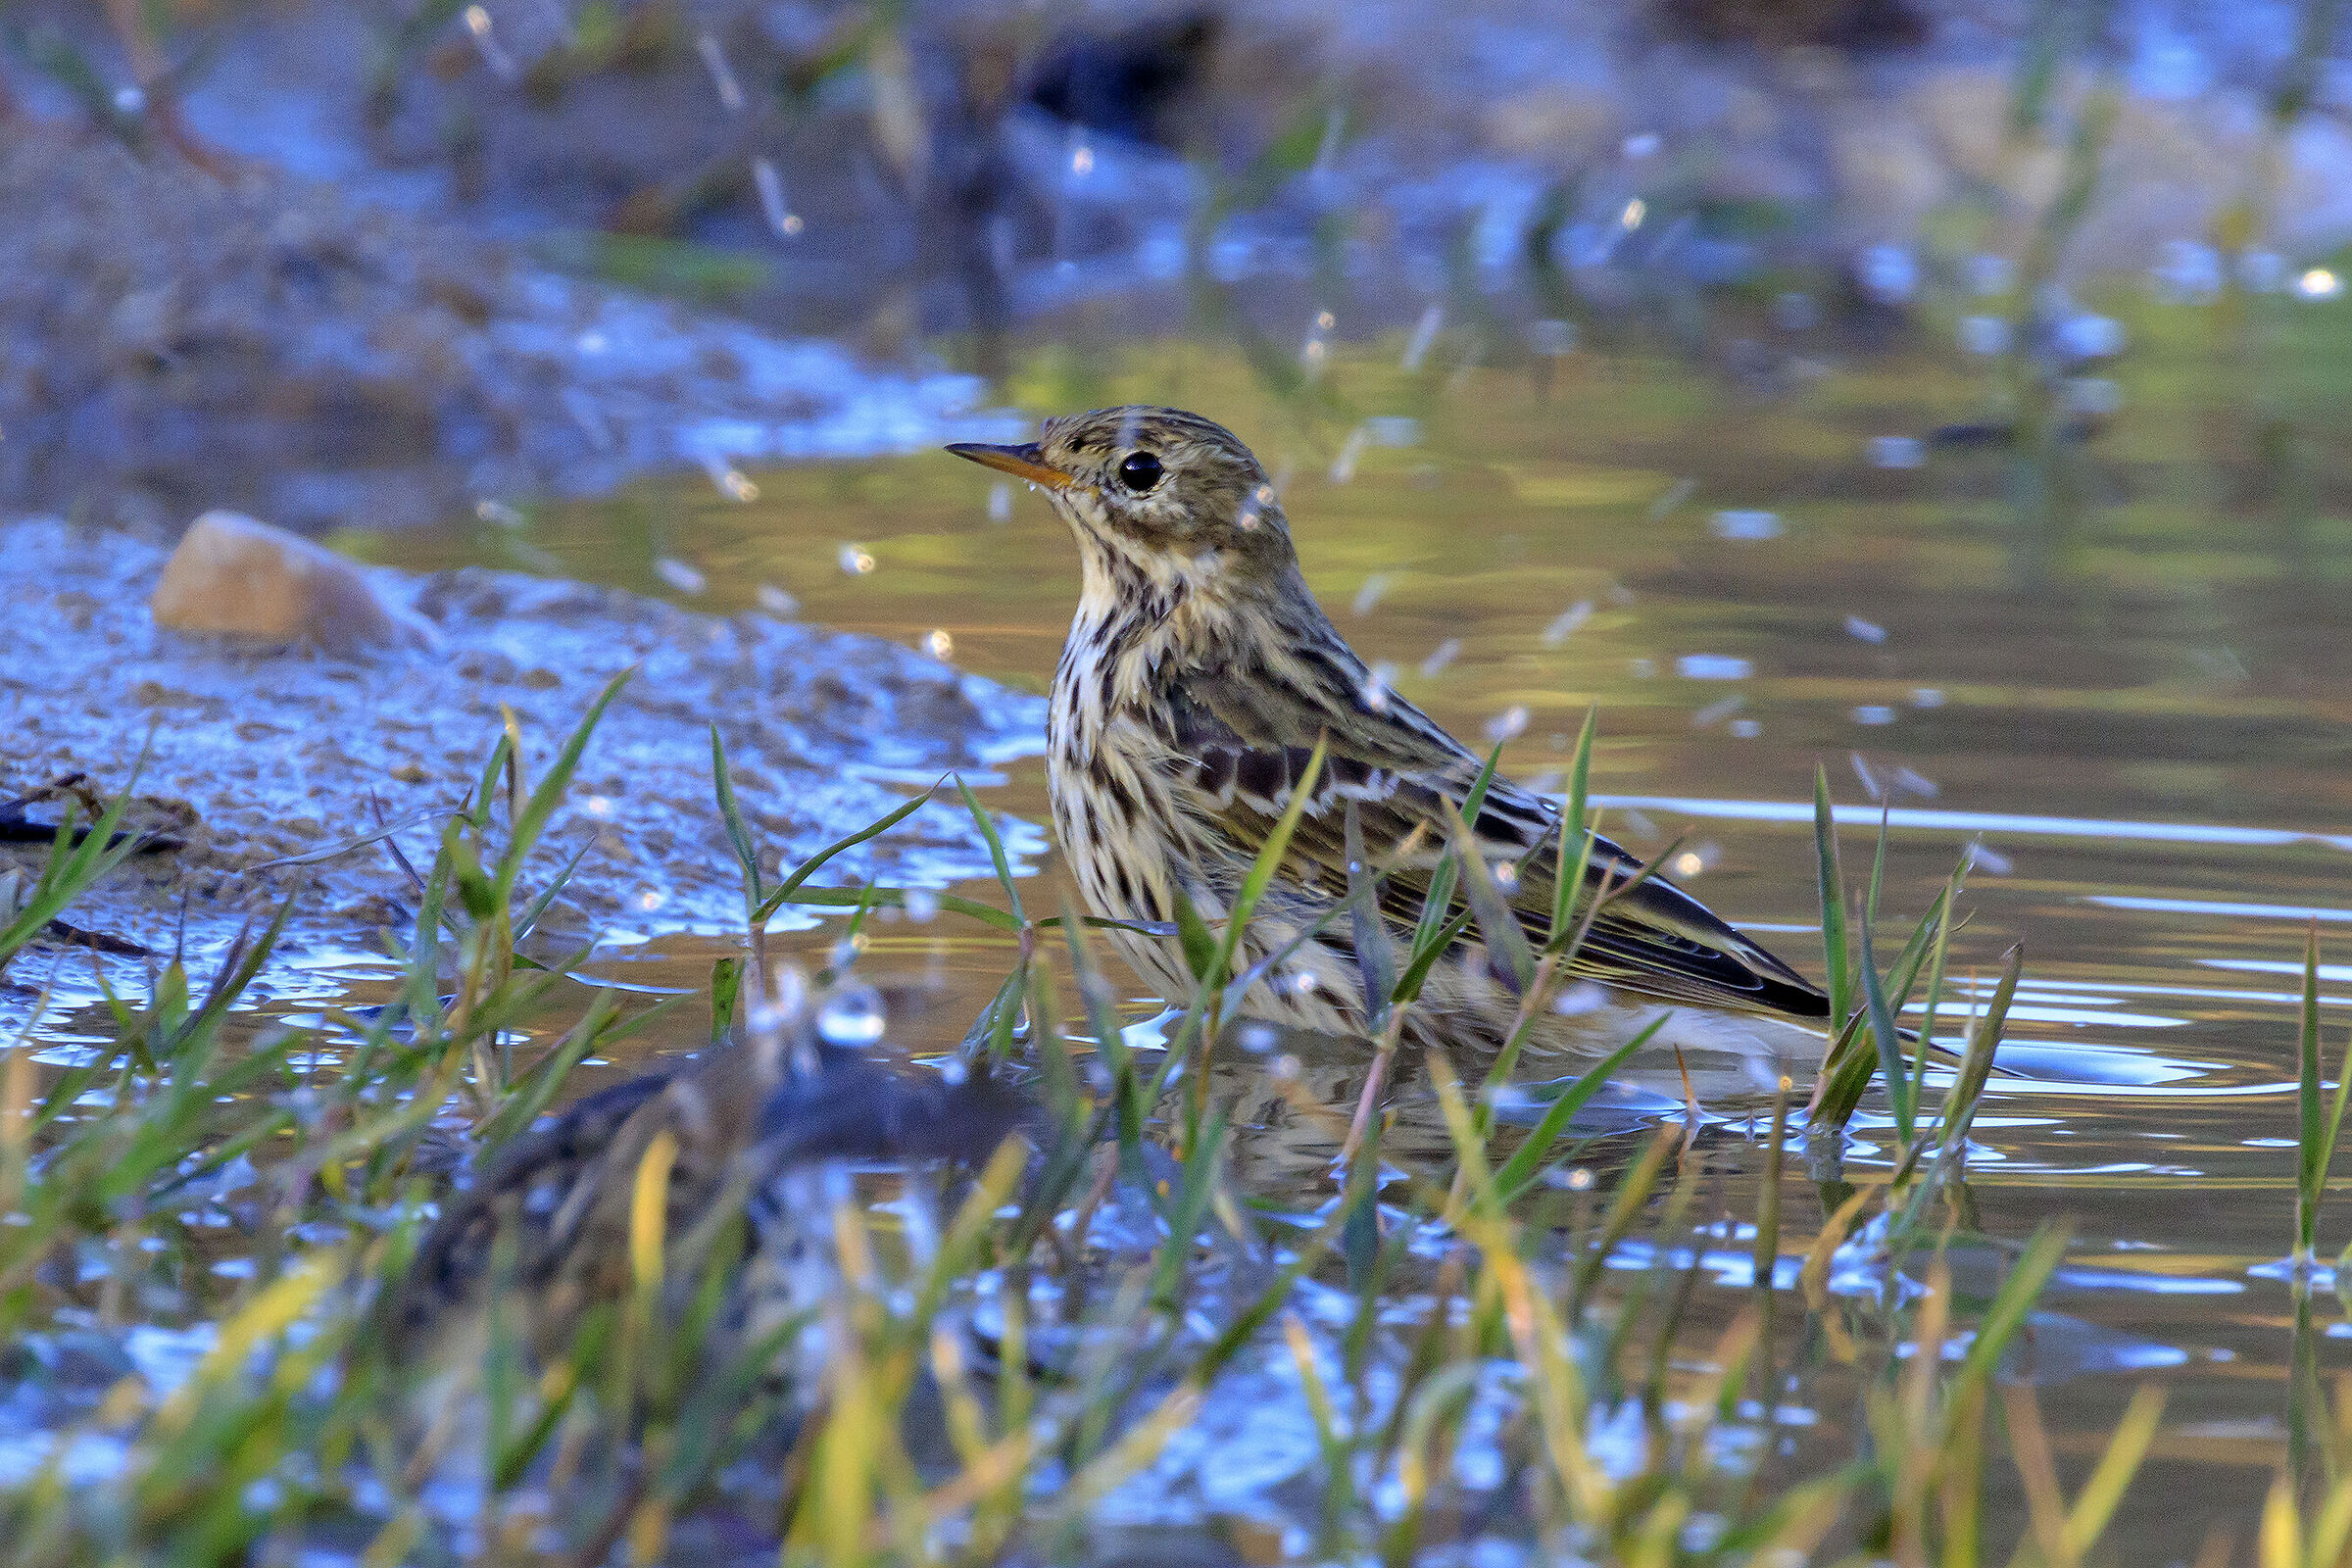 Meadow pipit...